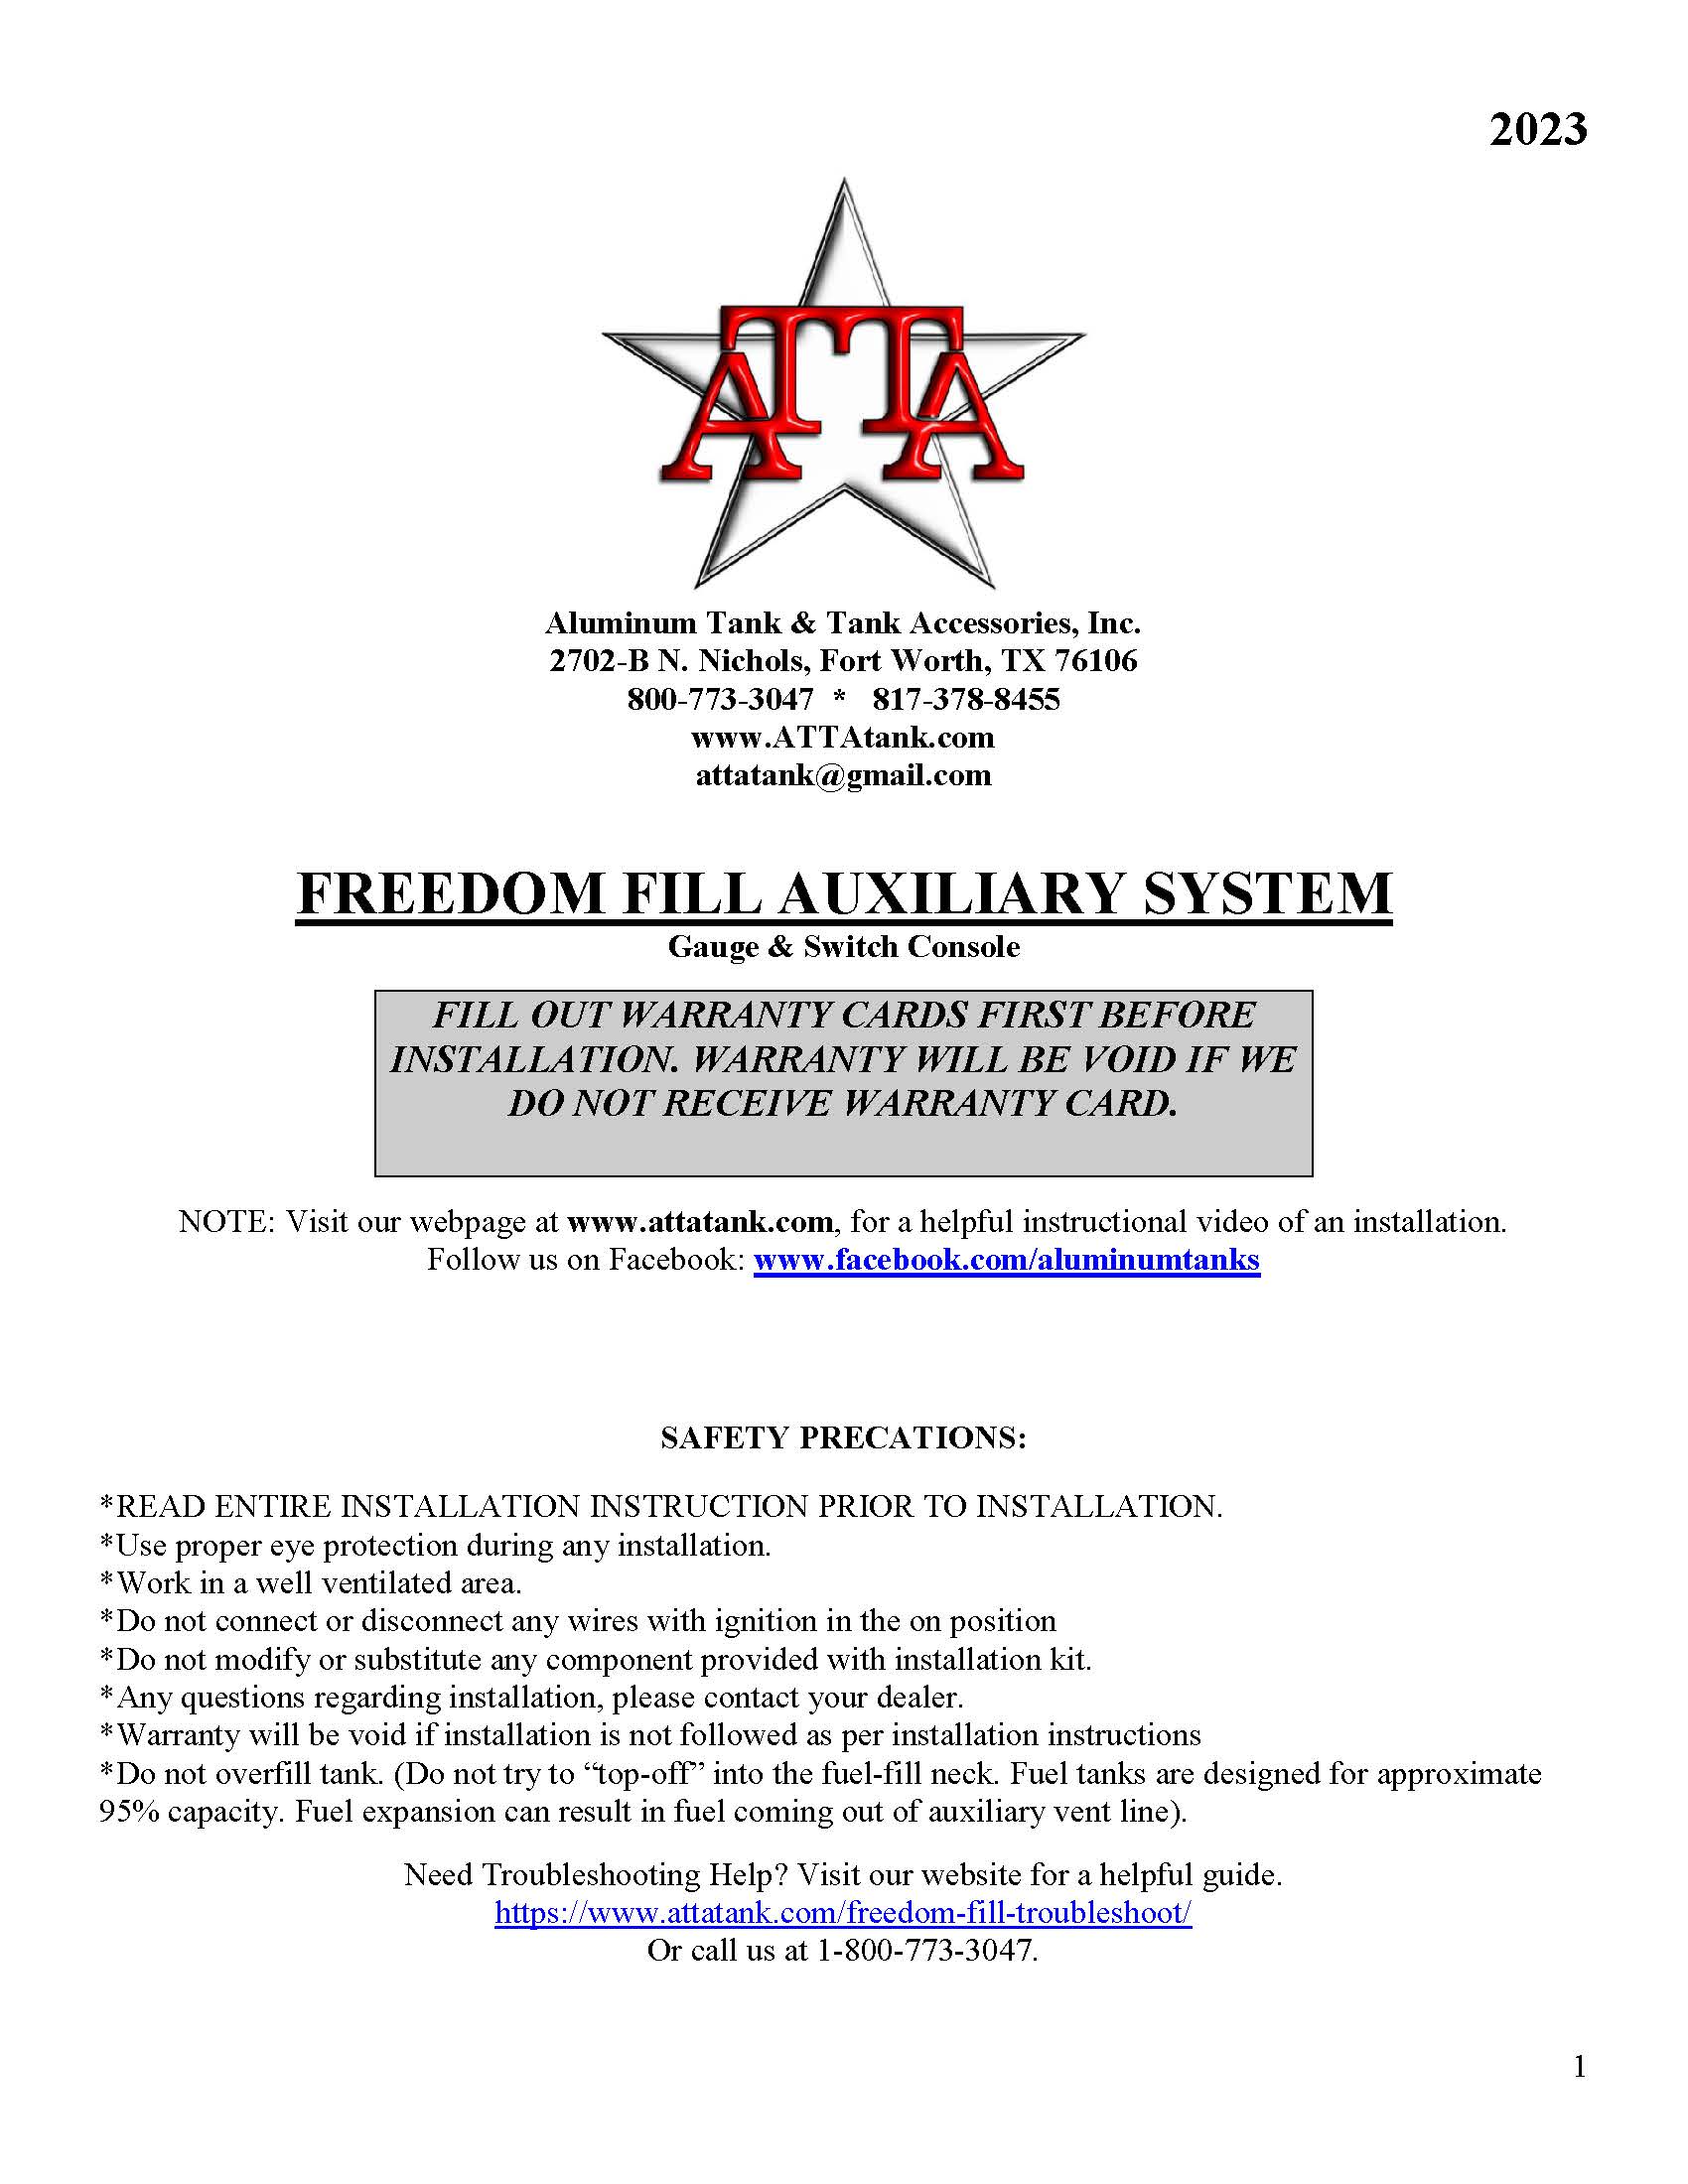 freedom-fill-auxiliary-system-2023-page-01.jpg